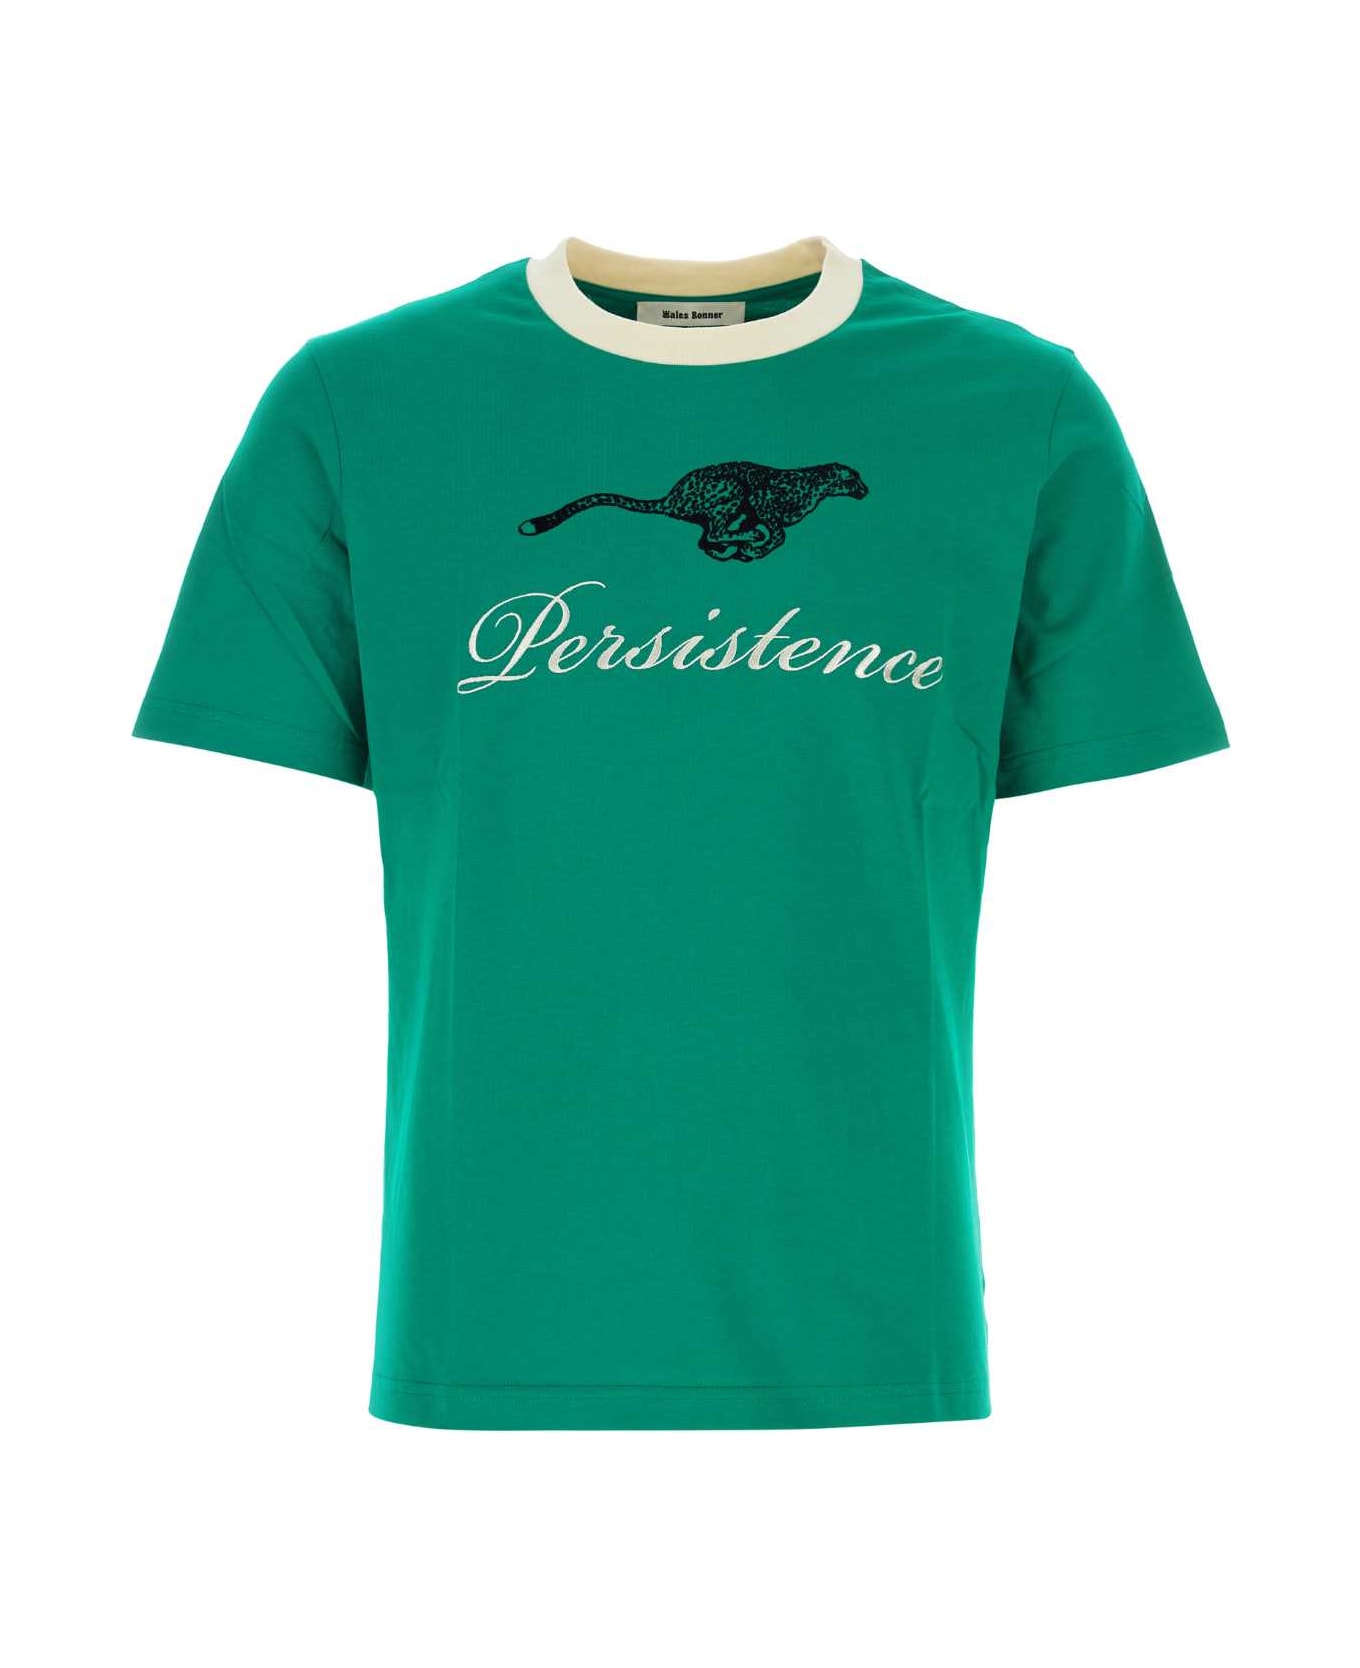 Wales Bonner Green Cotton Resilience T-shirt - Green シャツ